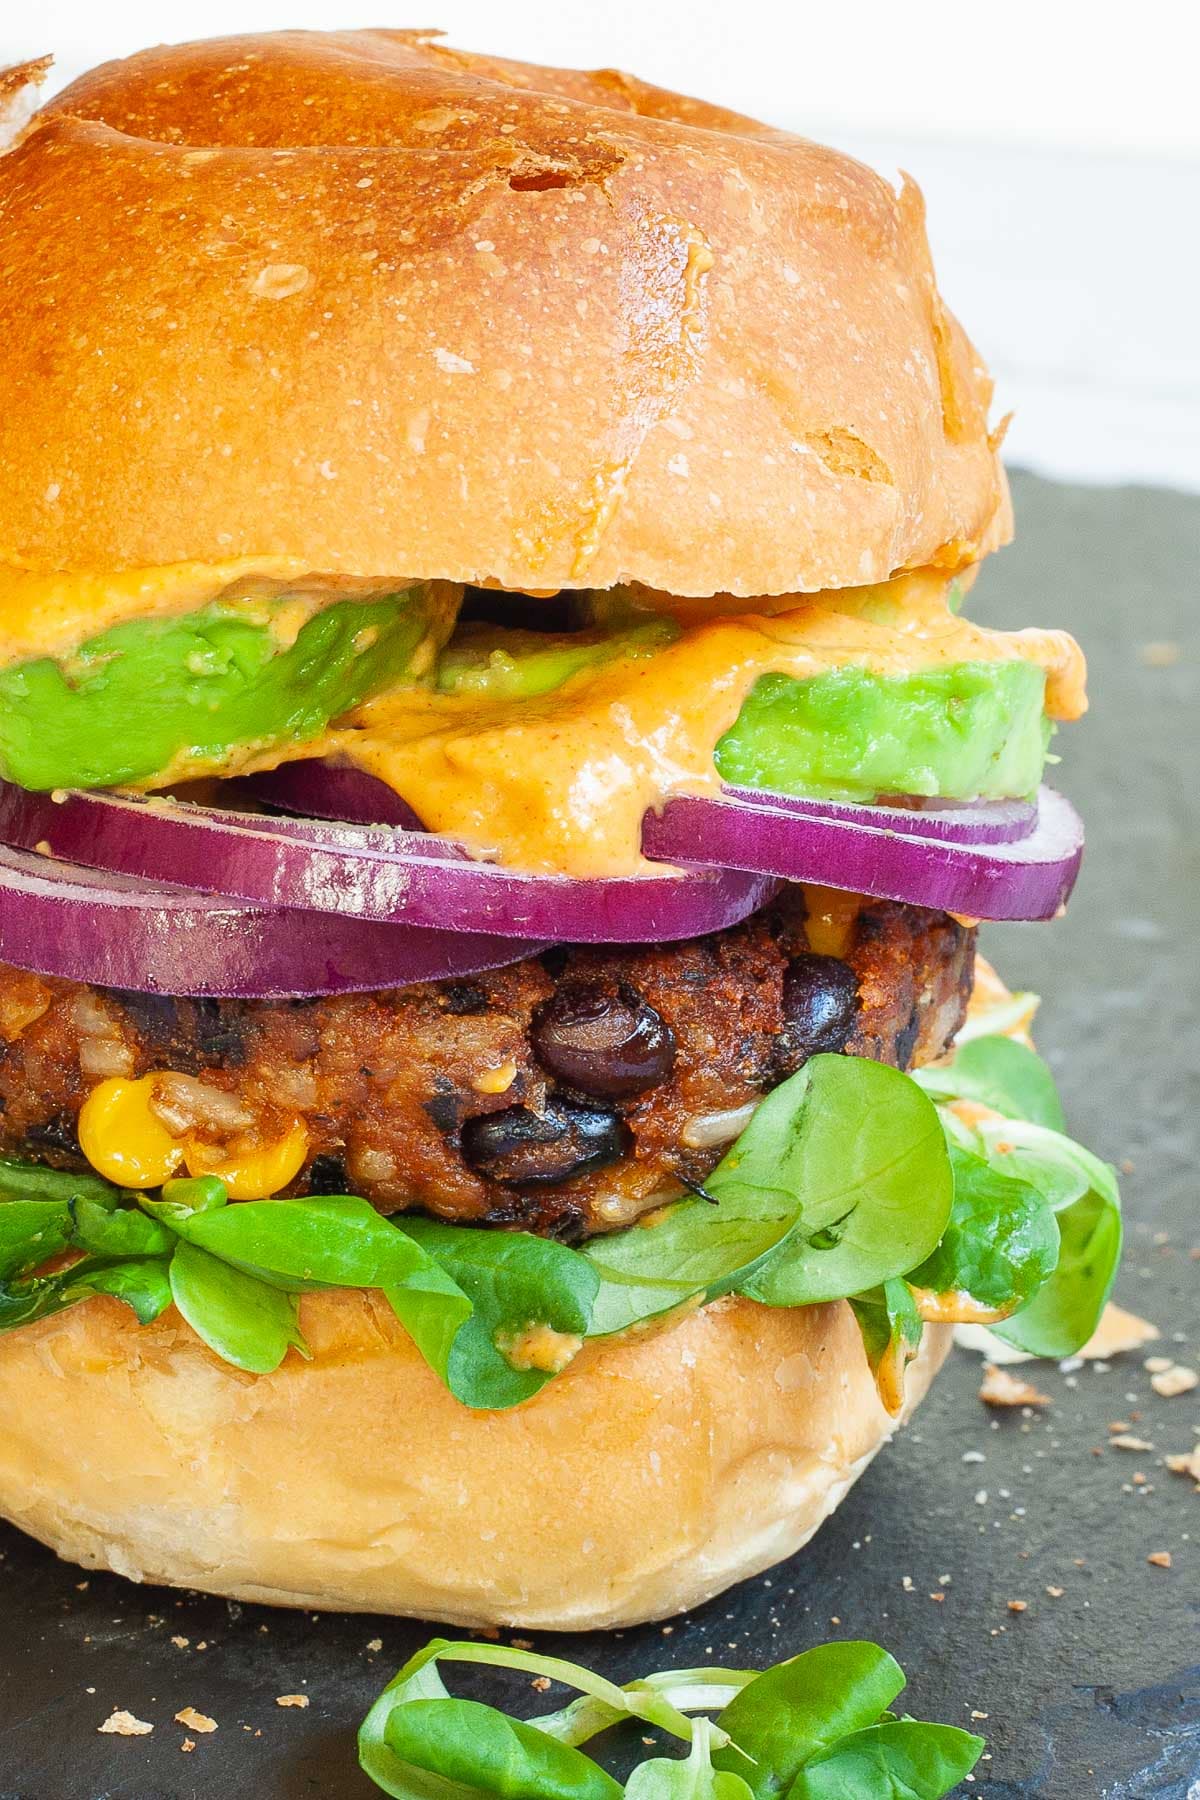 A burger bun with yellow sauce and green leaves is topped with a thick brown burger patty with visible sweet corn and black bean pieces, then red onion and avocado slices drizzled with yellow sauce again. It is covered with a top bun.